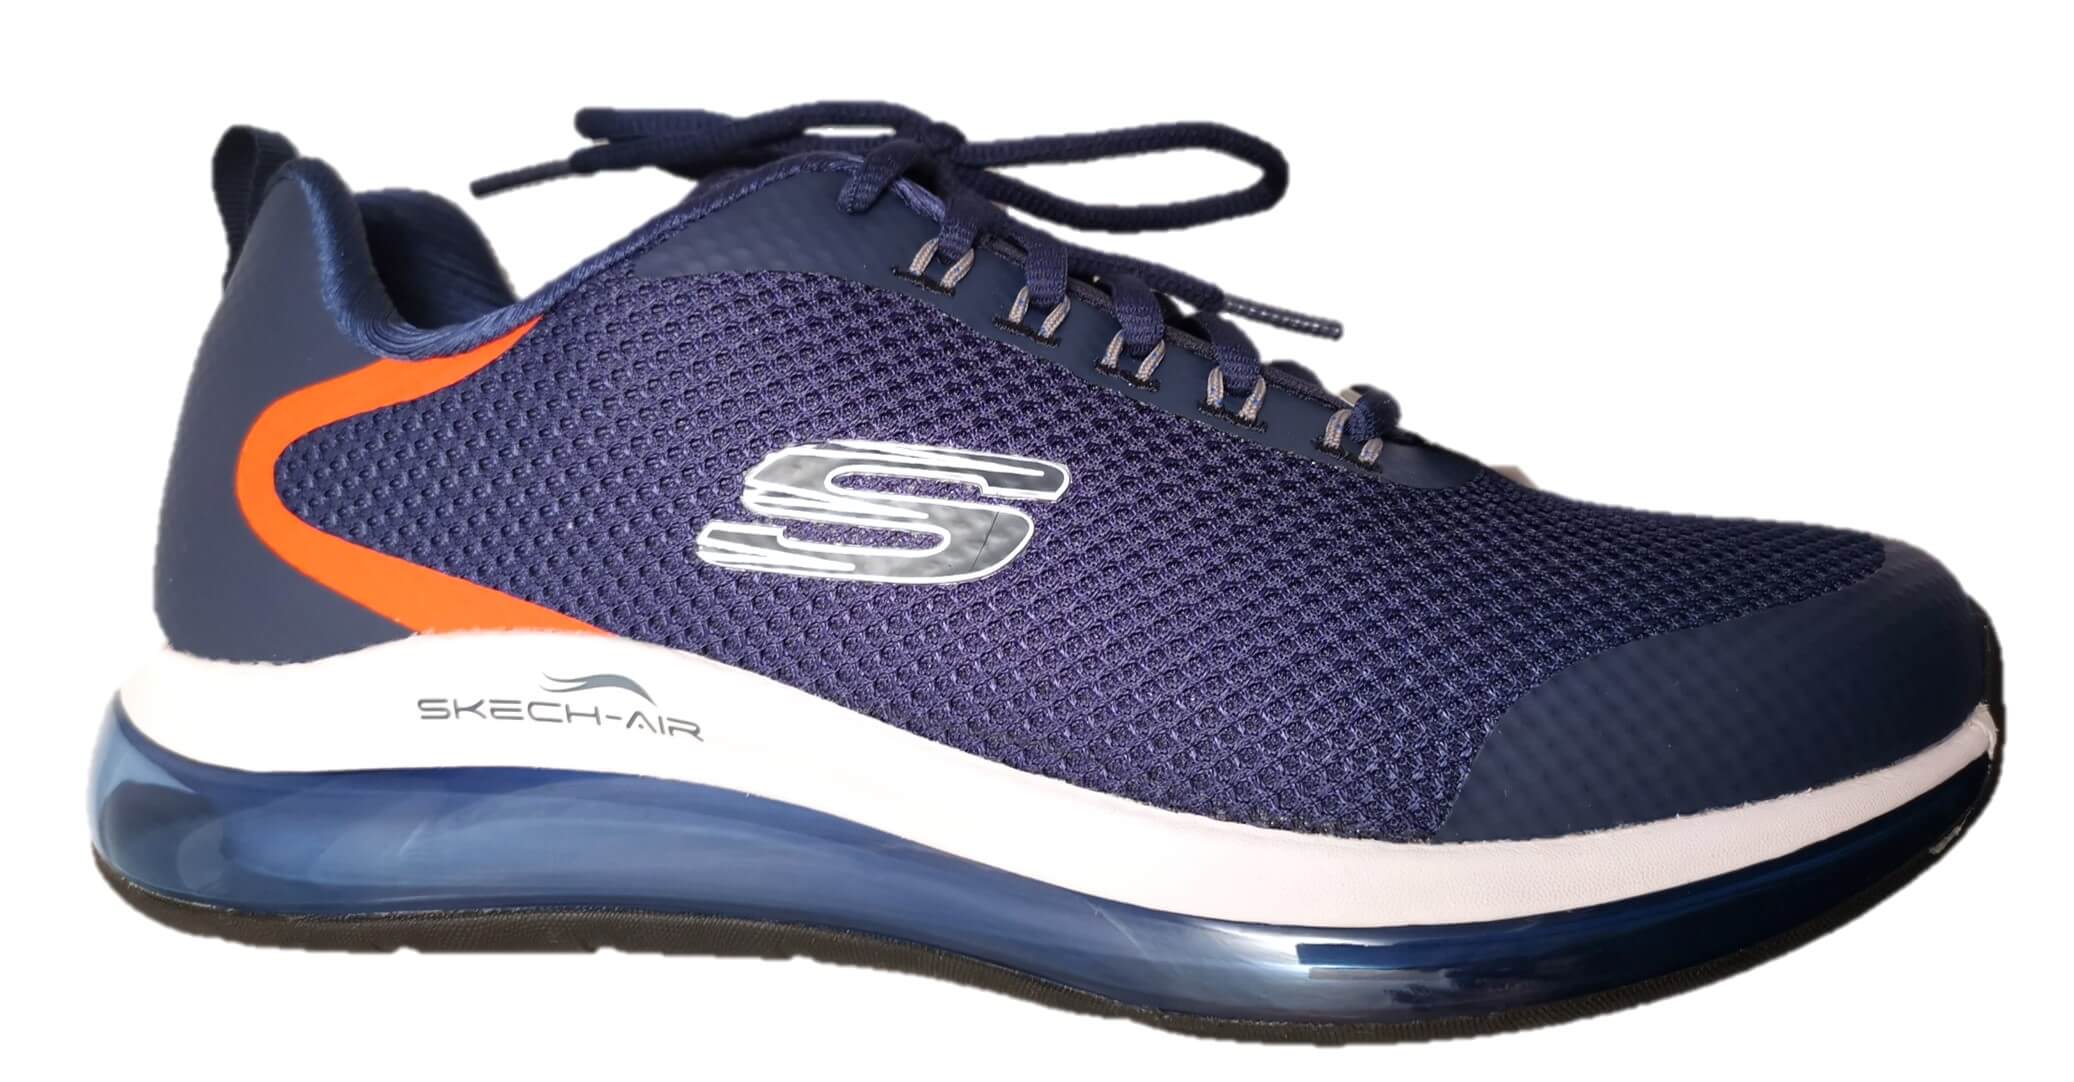 skechers return policy in store off 70 